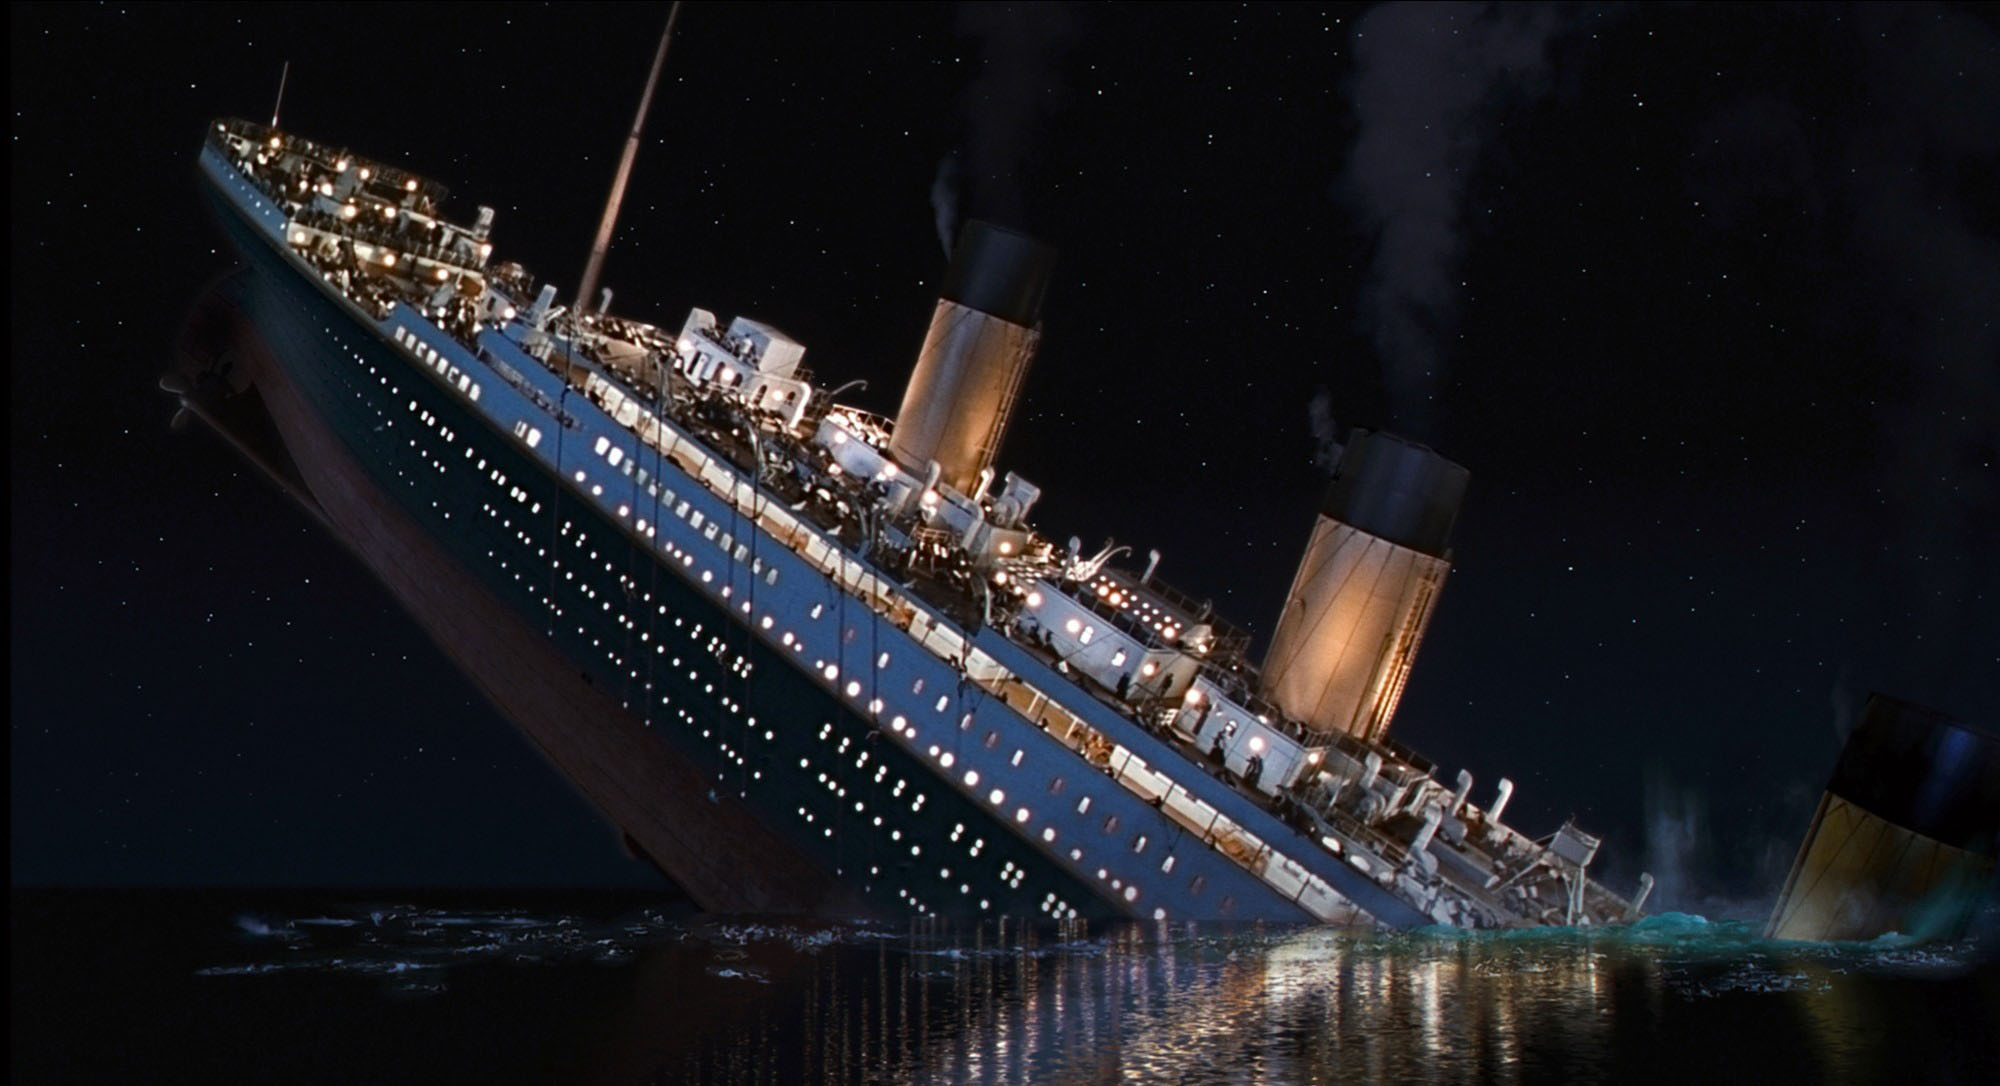 How Many People Survived The Titanic? (Explained)